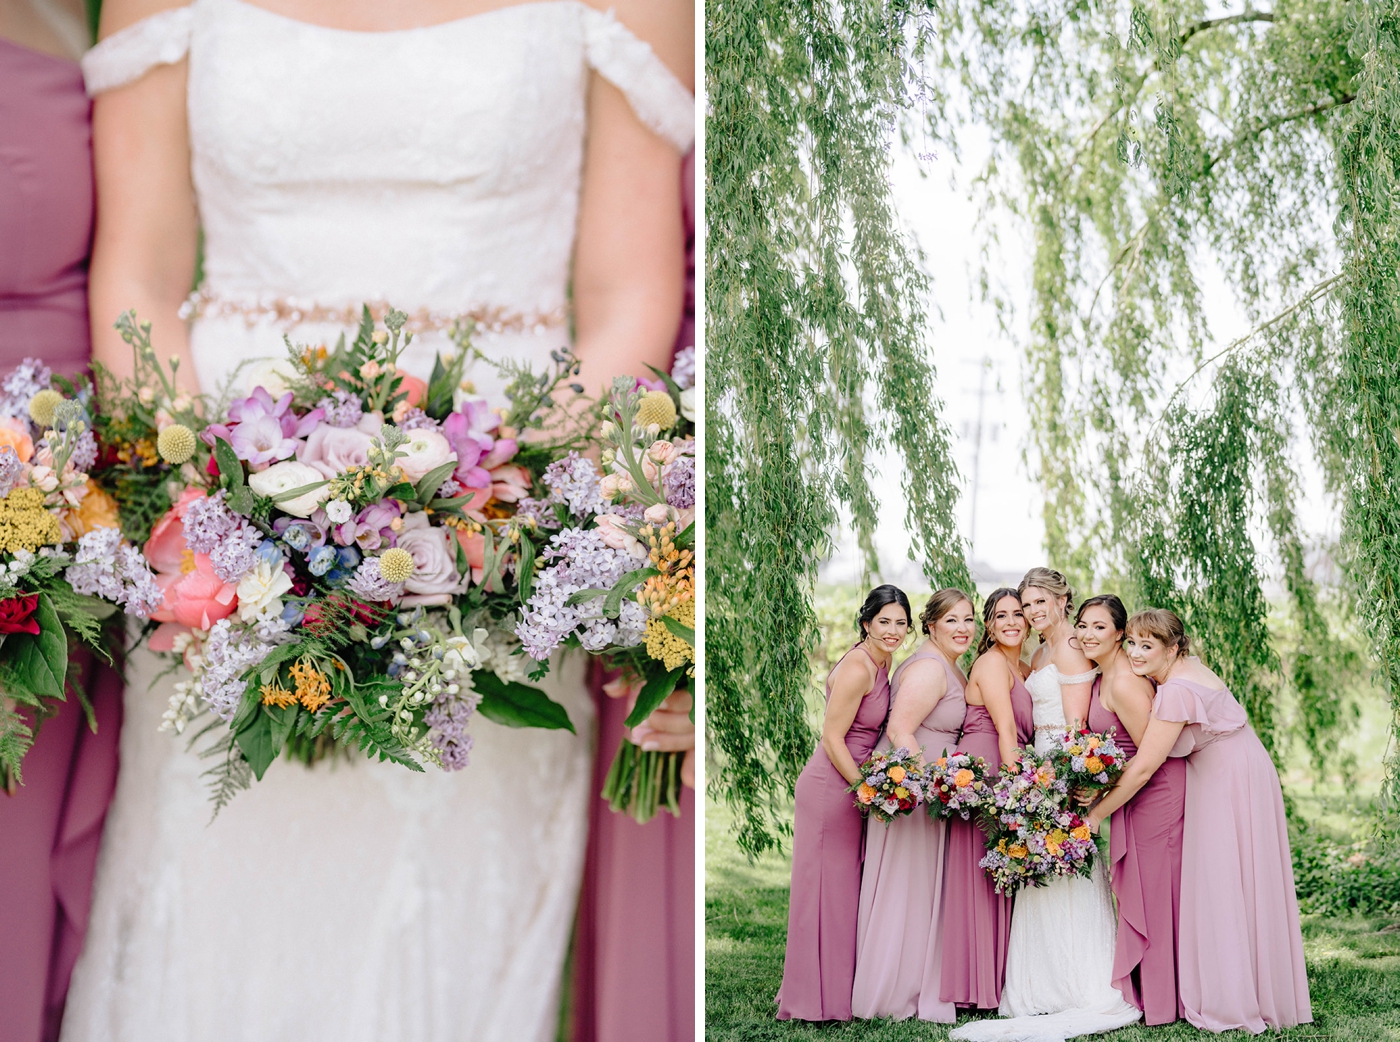 Bridal bouquet filled with lavender roses, lilacs, and pink peonies by Foote Florals